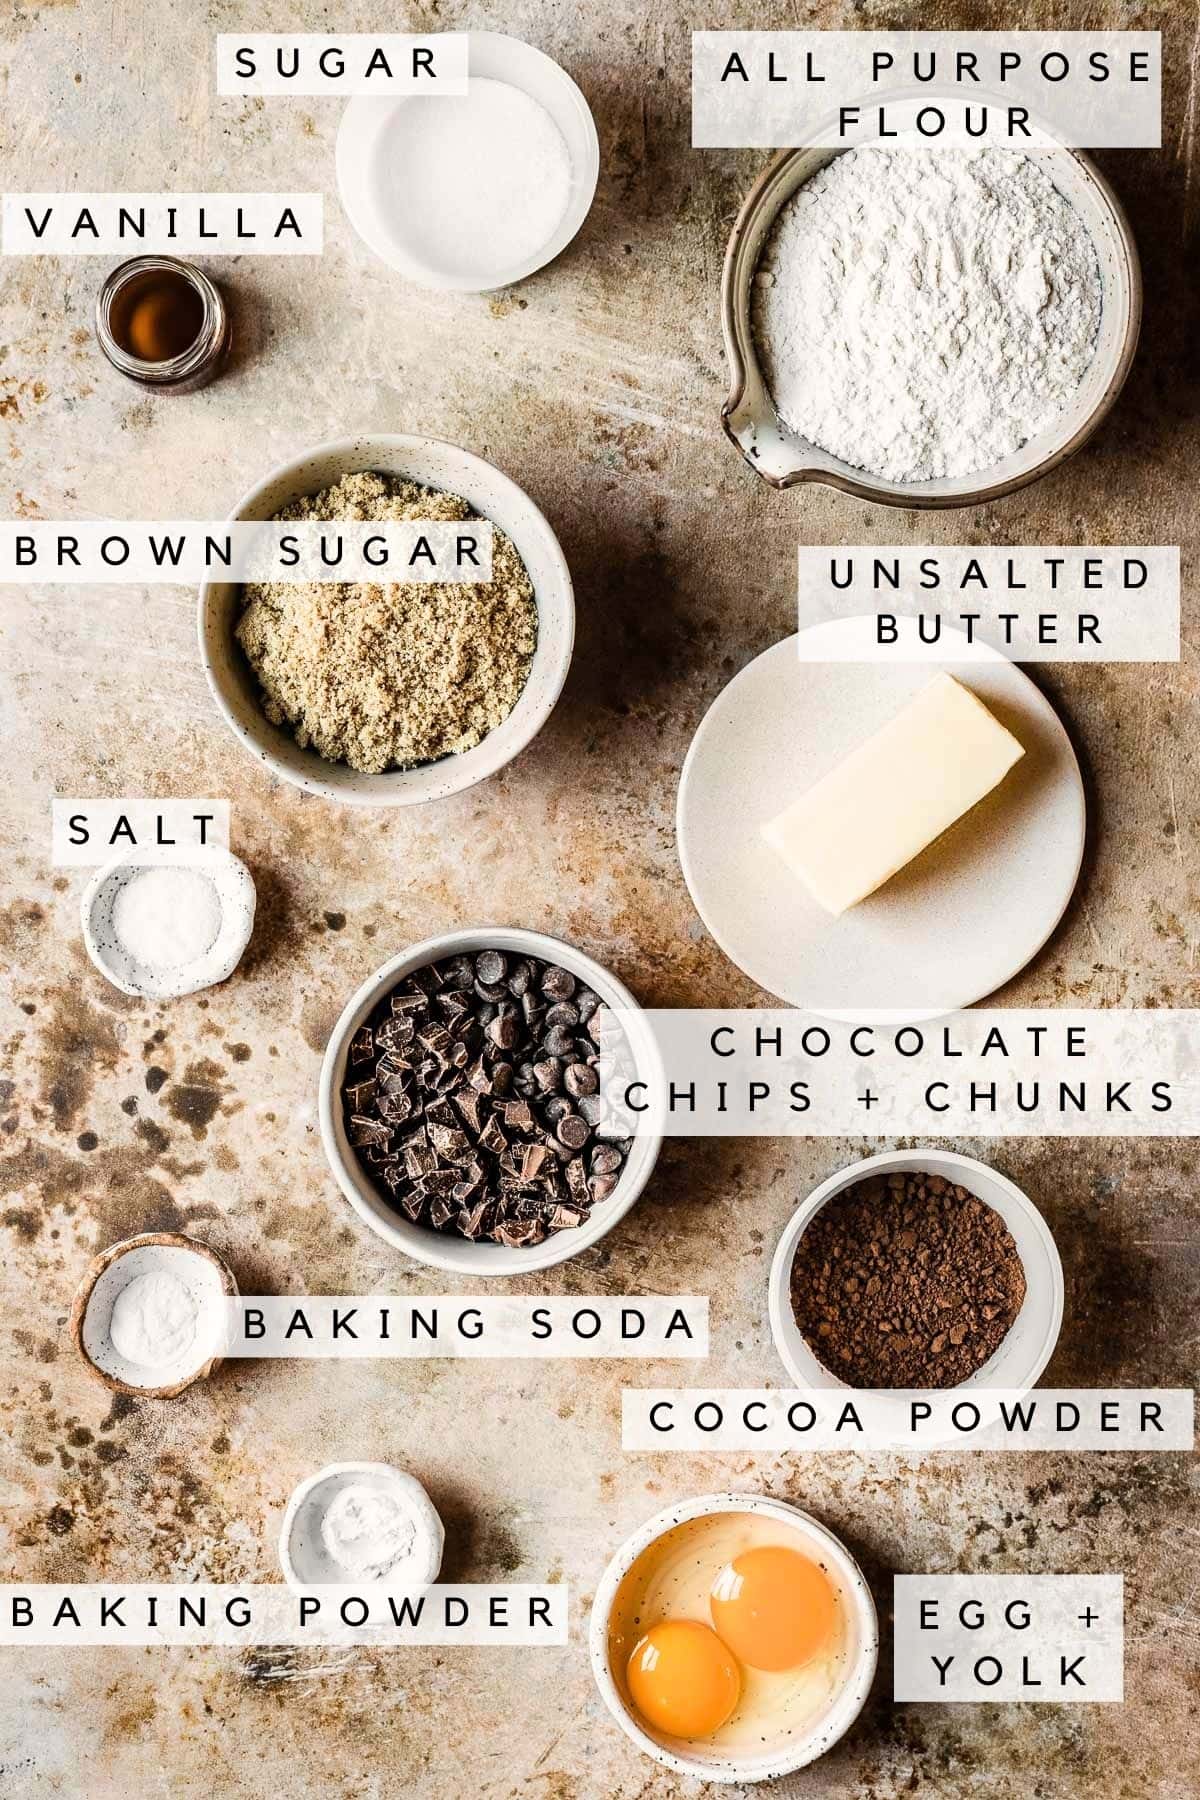 Labeled ingredients for chocolate cookies with cocoa powder.